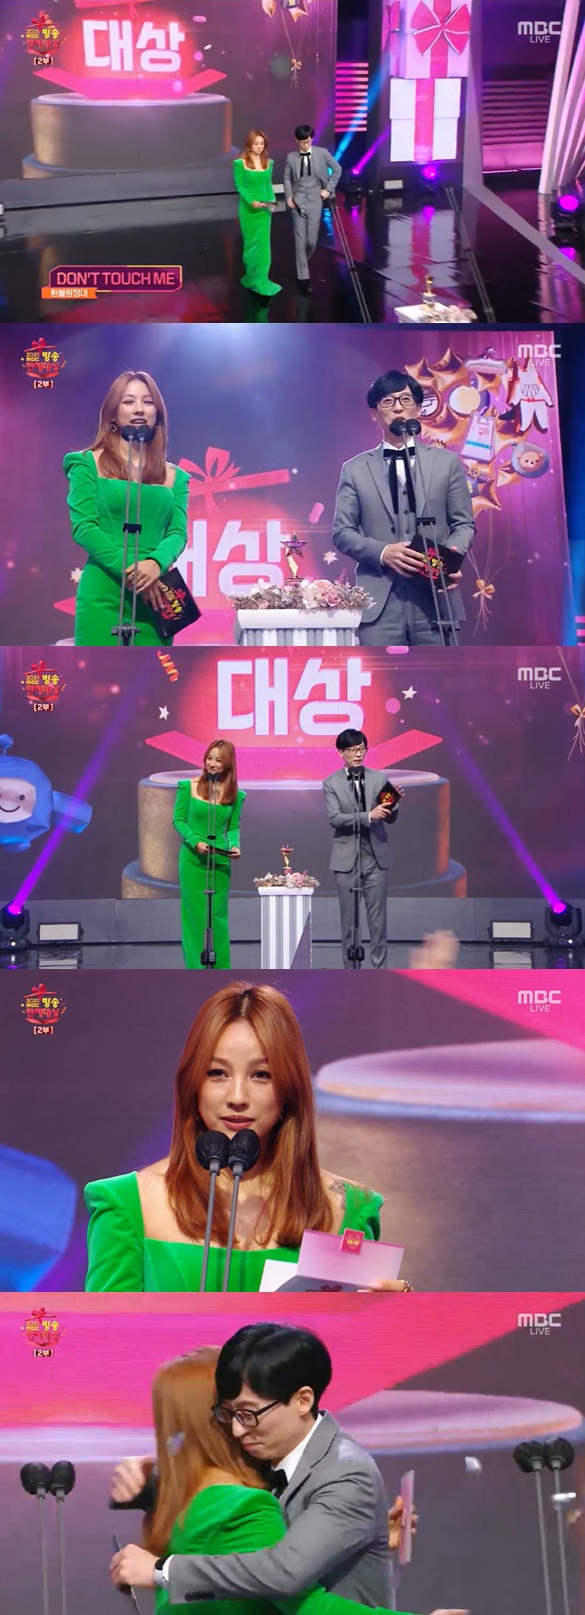 On the afternoon of the 29th, 2021 MBC Broadcasting Entertainment Grand Prize was held at MBC New Building in Sangam-dong, Seoul Mapo-gu. MC was played by Jun Hyun-moo, Lee Sang-ui and Kim Se-jung.Lee Hyori was the winner of the award on the day, and he was a big winner last year, What do you do when you play? He was a lantern of the refund expedition, Linda G of the buds, but he could not attend.Instead, the video shot in a quilt dress relieved the regret of not attending.He was on stage with Yoo Jae-Suk, the winner of the previous years Grand Prize, and greeted him with pleasure.Then he was told that he was flying from Jeju Island at 7:00 and was going up at 12:00, it was almost 1:00, he said.Yoo Jae-Suk also said, I am really good because I finish at about 12:10.I want to see the entertainment target that ends in Haru, but today it is going beyond 1 oclock. Lee Hyori said, Its too long, right?Yoo Jae-Suk said, It is a place to share the pleasure because the entertainment target is a feast, but it would be nice to reduce the time a little. I do not know where next year, but I will pray for the entertainment target that ends in Haruman.Yoo Jae-Suk, who was the winner of the Grand Prize, was named as the candidate on the day.MBC alone won seven grand trophies, and collected 17 trophies in his career. Lee Hyori said, How do you feel?, and Yoo Jae-Suk carefully replied, Because I won last year...In addition, Lee Hyori heard the number of targets received by Yoo Jae-Suk and said, Is not it time to leave for my juniors?Yoo Jae-Suk responded, I have family members with me and I have work to do.As such, Lee Hyori left an intense impact with Yoo Jae-Suk in his short appearance, and also appeared in a green dress, which was admired with his still visuals.▲ Target = Yoo Jae-Suk (What do you do when you play?)▲ Entertainment Impression of the Year = Kim Gura, Kim Sung-joo, Park Narae, Yoo Jae-Suk, Lee Young-ja, Jun Hyun-moo▲ Male Grand Prize = Ahn Jung-hwan (Im glad I dont fight), Gian 84 (I live alone)▲ Womens Grand Prize = Shin Bong-sun (What do you do when you play?, Masked Wang)▲ Radio Award for Best = Jang Sung-kyu (Good Morning FM Jang Sung-kyu)▲ Entertainment of the Year award = What do you do when you play?▲ Variety Division Mens Excellence Award = Jang Dong-min (Save me! Holmes)▲ Male Excellence in Music and Talk = Yoo Se-yoon (Radio Star)▲ Womens Excellence Prize = Hong Hyun-hee (Point of Potential Interference)▲ Radio Division Excellence Award = Moon Chun-sik (Jung Sun-hees now-radio era), Muzie Ahn Young Mi (Date Muzie of Dooshi, Ahn Young Mi)▲ PD Award = I live alone team▲ Best Entertainer Award = Yang Se-hyung (Save me! Holmes, Point of All-Interference), Yoo Byung-jae (Point of All-Interference, Guys Over Line: The Master-X)▲ Best Character Award = Jeong Jun-ha, Haha (What do you do when you play?)▲ Best Couple Award = Yoo Jae-Suk, Lee Min-Ju, Haha (What do you do when you play?)▲ Popular Award = Kim Jong-min (what do you do, cross-line guys: The Master-X), Sandara Park (Masked Wang, I live alone), Kee (I live alone)▲ Achievement Award = Ha Chun-hwa▲ Best Teamwork Award = MSG Wannabe (What do you do when you play?)▲ Mens MC Award = Boom (Save me! Holmes, Im glad you dont fight)▲ Womens MC Award = Park Sun-young (Anyway, go to work!)▲ Special Award = Kwon Yu-ri, Aiki, Ok Joo-hyun, Jeon So-yeon (After-school thrill)▲ Radio Contribution Award = NC Universe▲ Radio Division Artist of the Year Award = Park Se-hoon Writer (Economy in the Hand of Lee Jin-woo)▲ Special Award in Radio Division = Min-Ju Reporter (57 Minutes Traffic Information), Hur Il-hoo Announcer (Politician)▲ Current affairs and liberal arts category Artist of the Year = Min-Ju writer (PD notebook)▲ Special Prize in Current Affairs and Culture = Kang Dasom announcer (Tamna TV), Oh Eun-young (Document Flex), Jung Jun-hee (100 Minute Debate)▲ Digital Content Award = Change! Holmes▲ Artist of the Year = Park Hyun-jung (Radio Star)▲ Male Rookie of the Year = Park Jae-jung (What do you do when you play?, I live alone)▲ Womens Rookie of the Year = Lee Mi-joo (What do you do when you play?)▲ Radio Rookie of the Year = Jin Jun-ha, Shin Ji (Jeong Jun-ha, Shin Jis single bungle show)Photo = MBC Broadcasting Screen